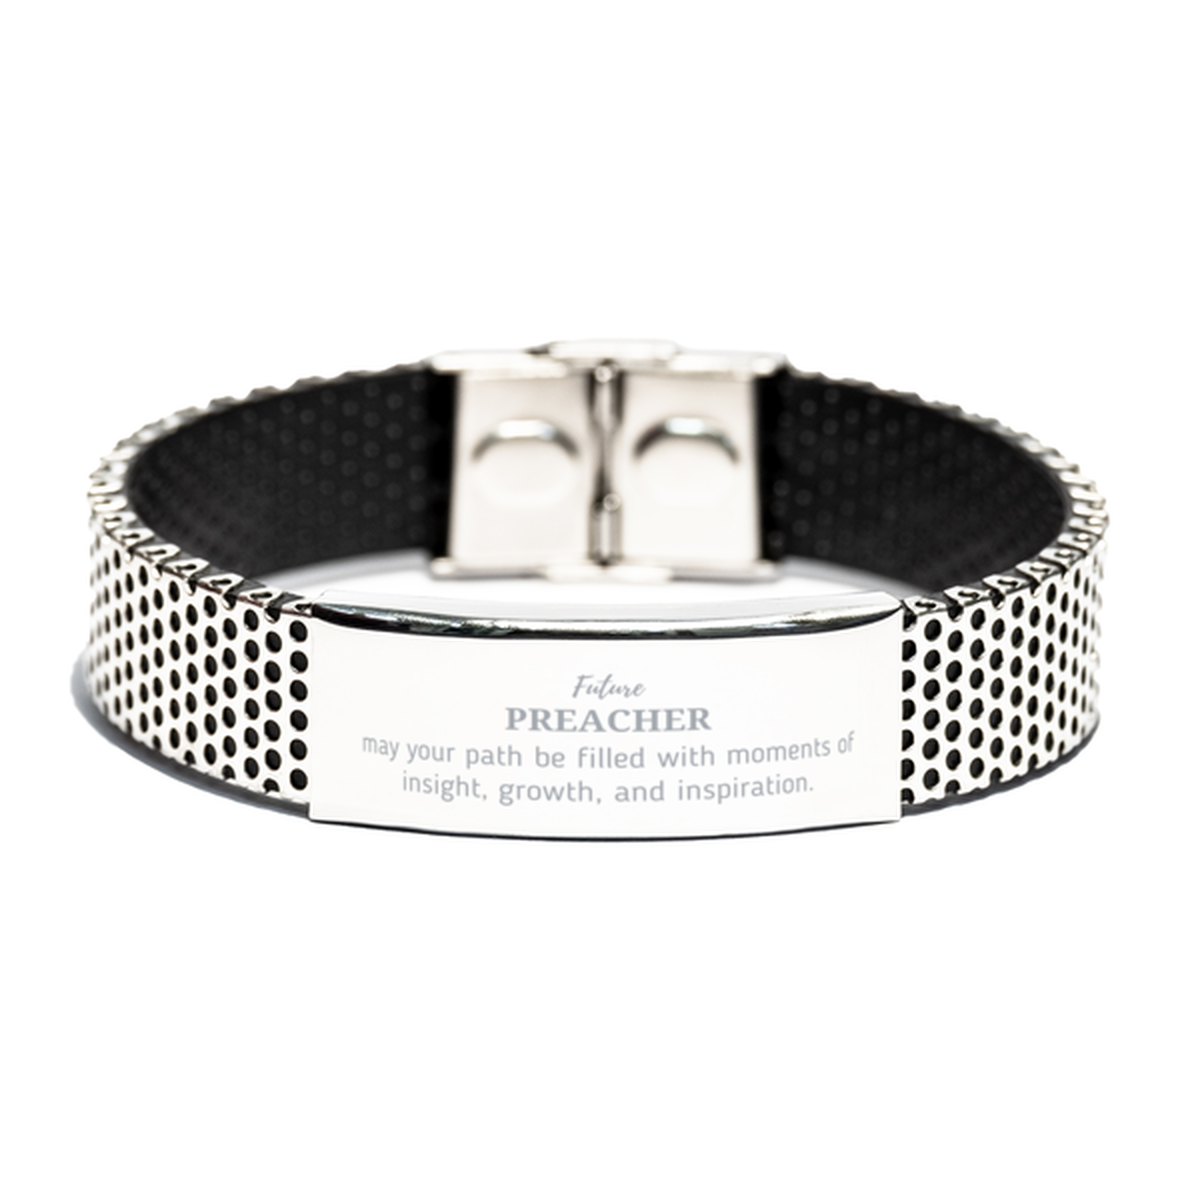 Future Preacher Gifts, May your path be filled with moments of insight, Graduation Gifts for New Preacher, Christmas Unique Stainless Steel Bracelet For Men, Women, Friends